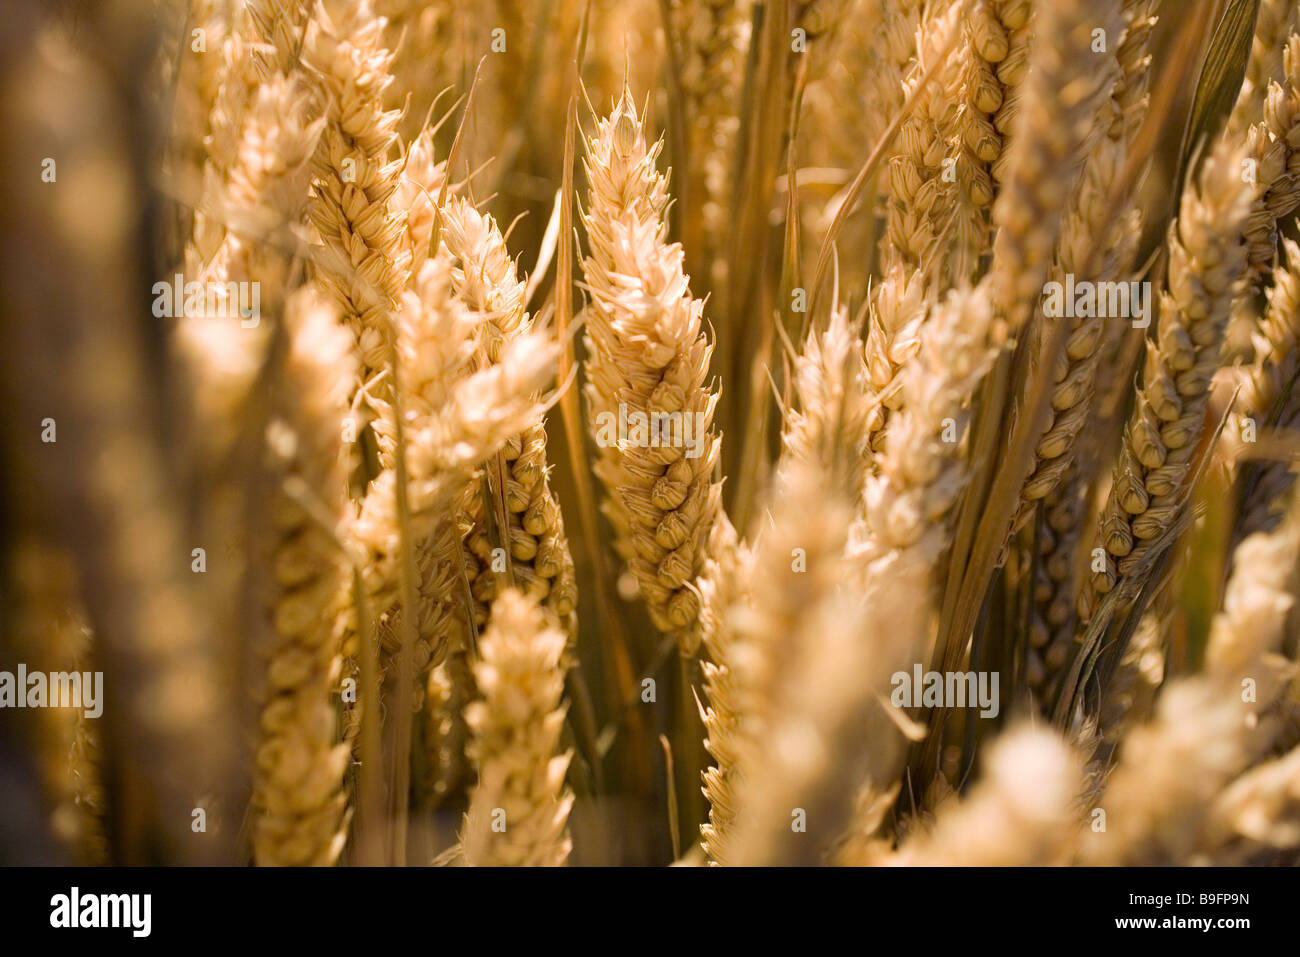 Agriculture agrarian-economy cultivation ground-utilization Close-up field-economy food yellow grains grain-cultivation Stock Photo